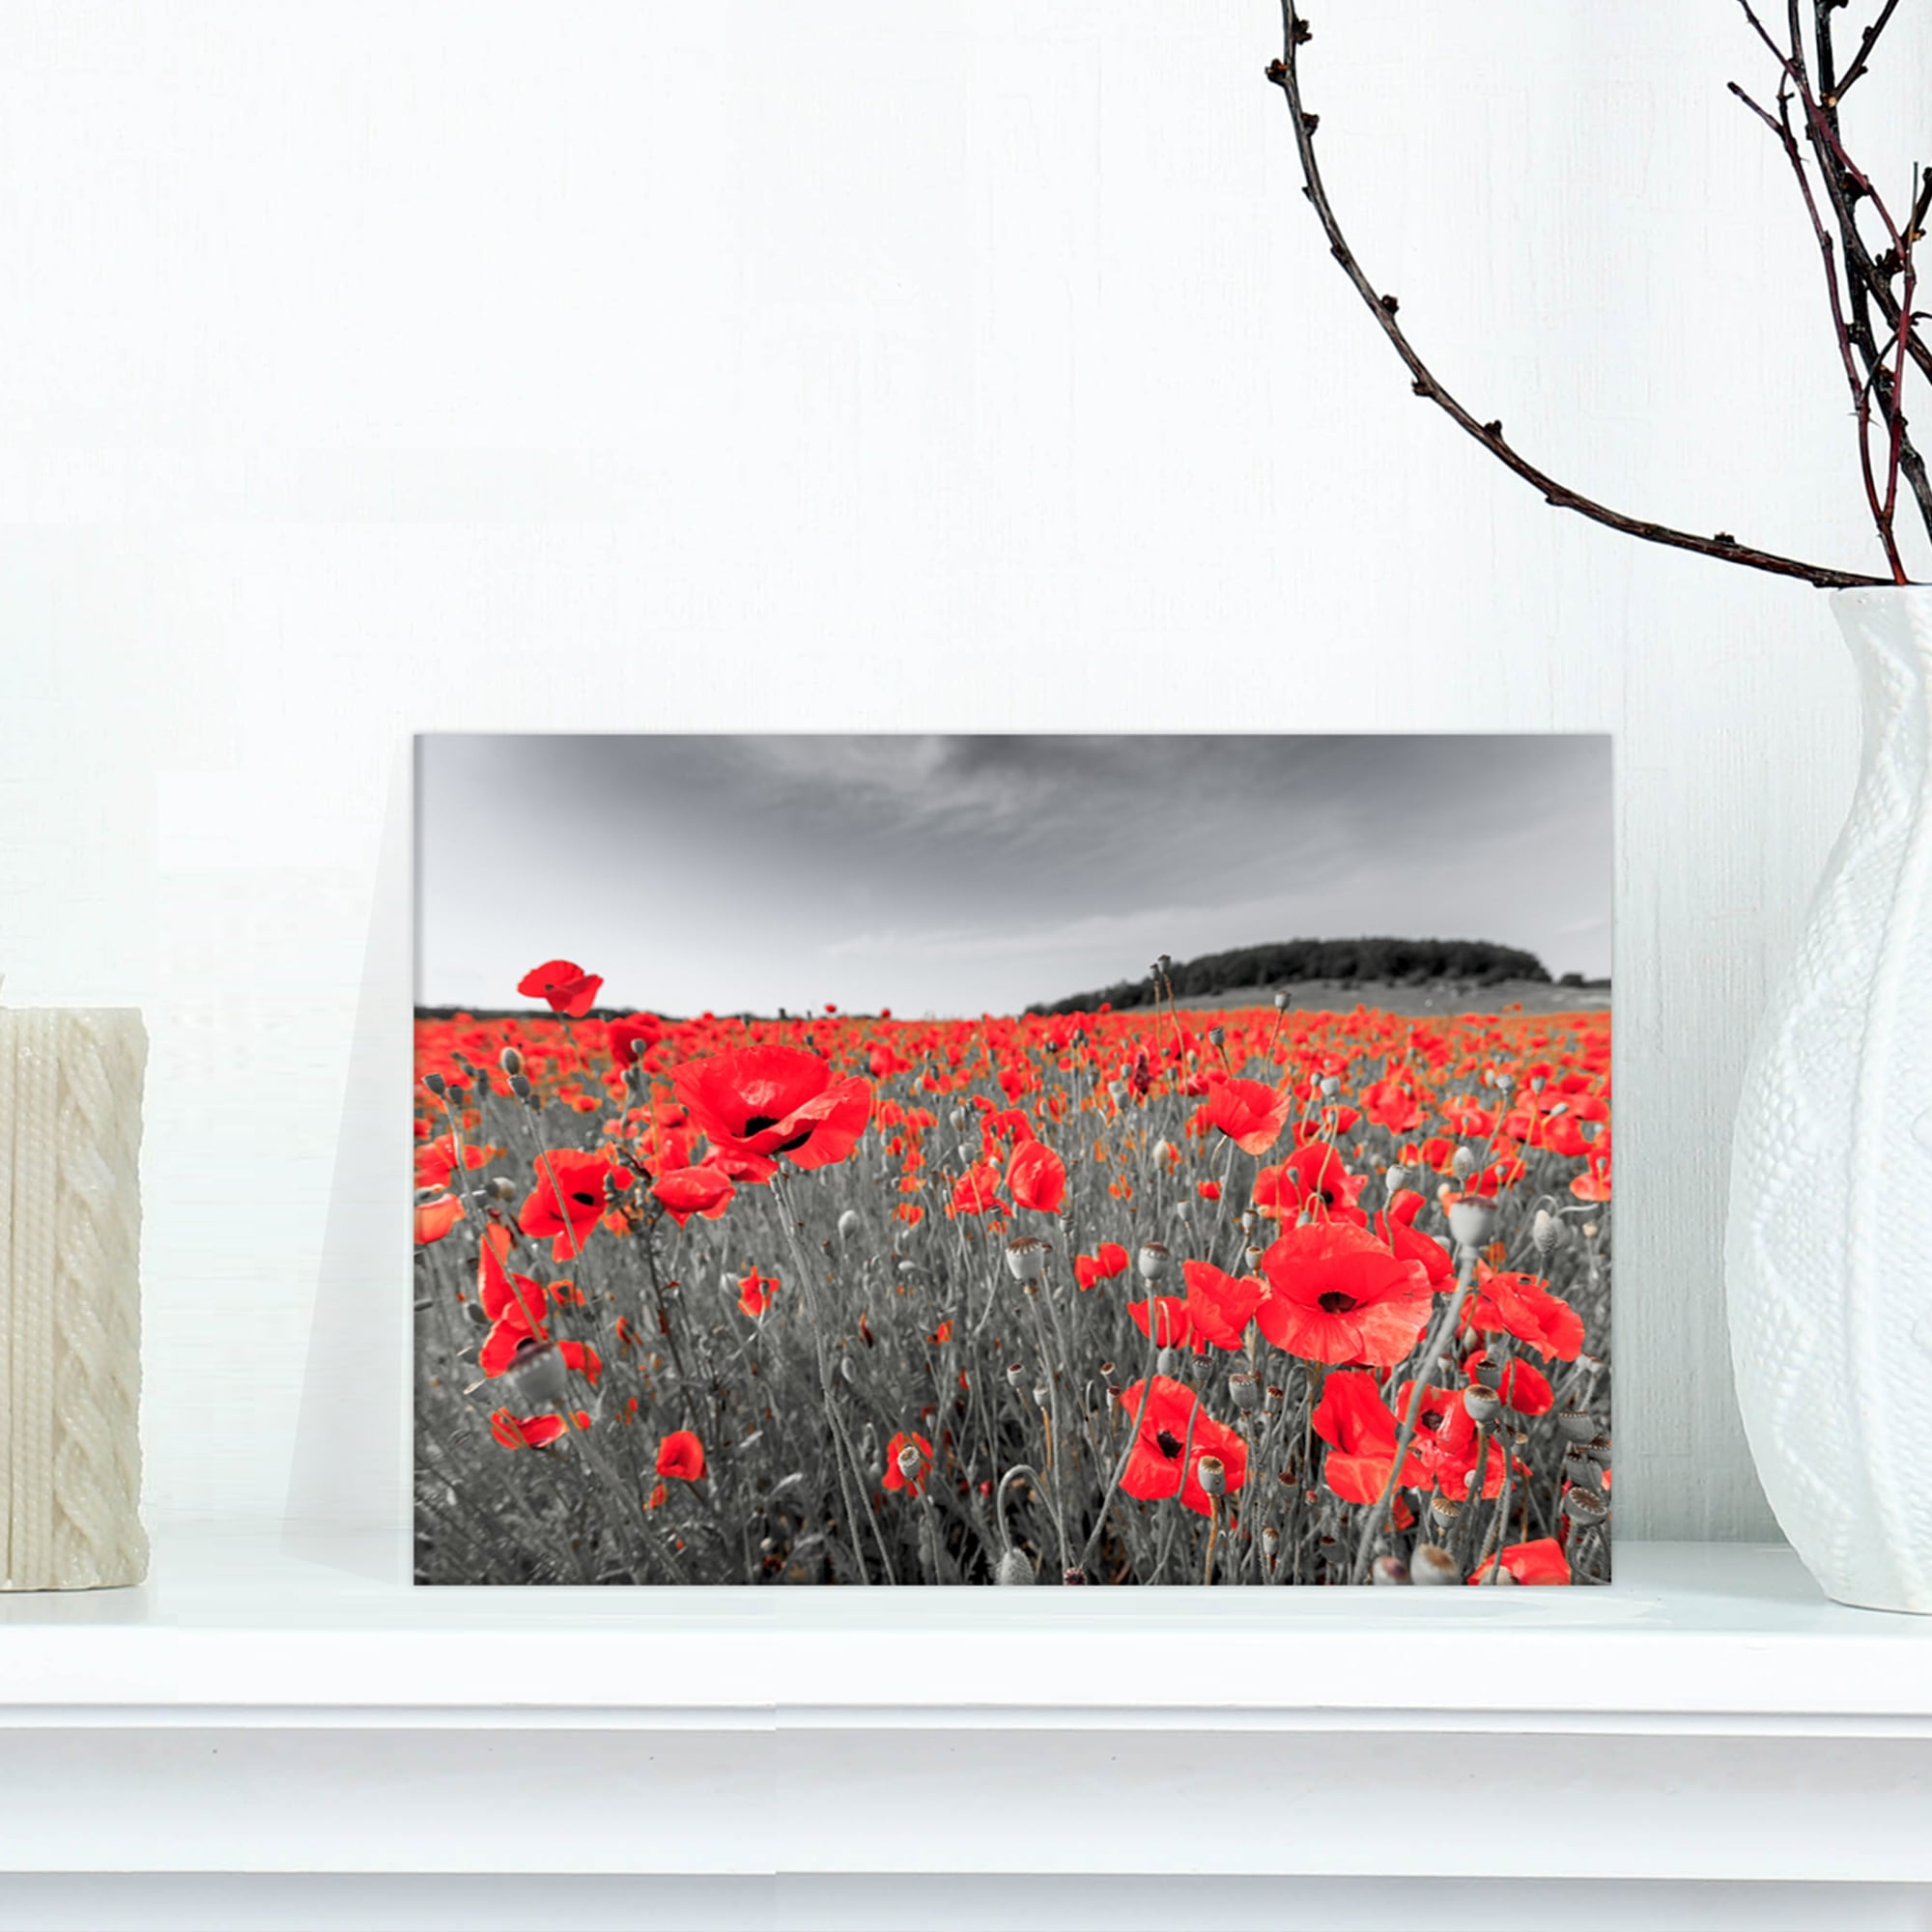 https://ak1.ostkcdn.com/images/products/is/images/direct/687765f62de78c1ff0f04d7b275c244cce81aa9e/Designart-%27Red-Poppies-Field%27-Landscapes-Floral-Photographic-on-wrapped-Canvas.jpg